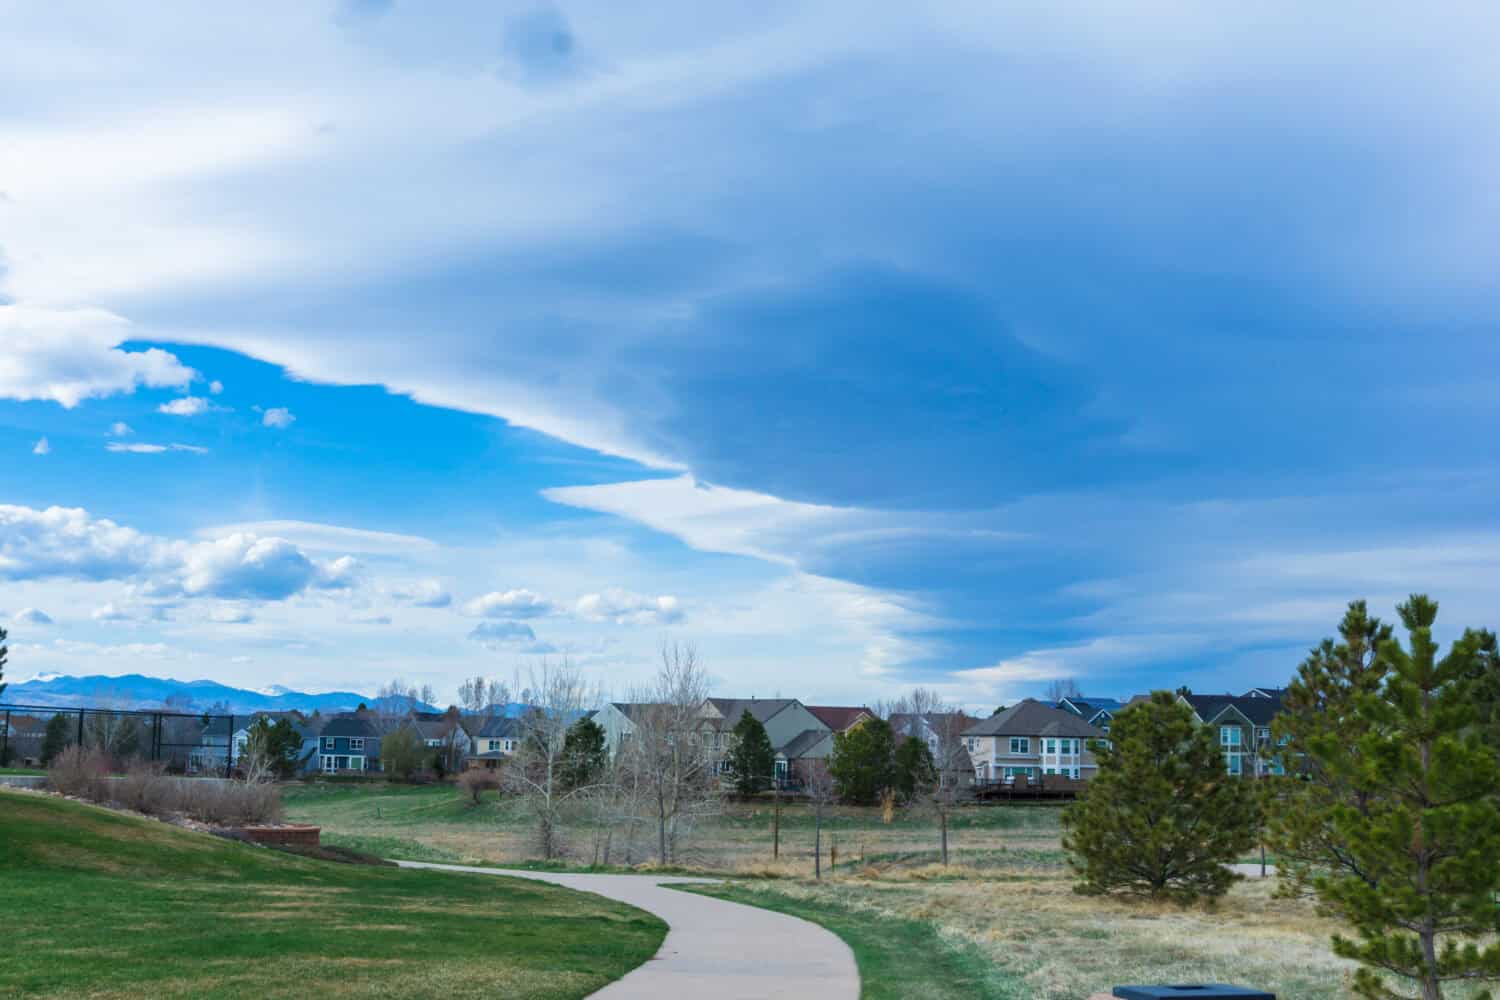 Park near Stone Mountain Elementary school, Highlands Ranch, Colorado, Western State in United States of America.